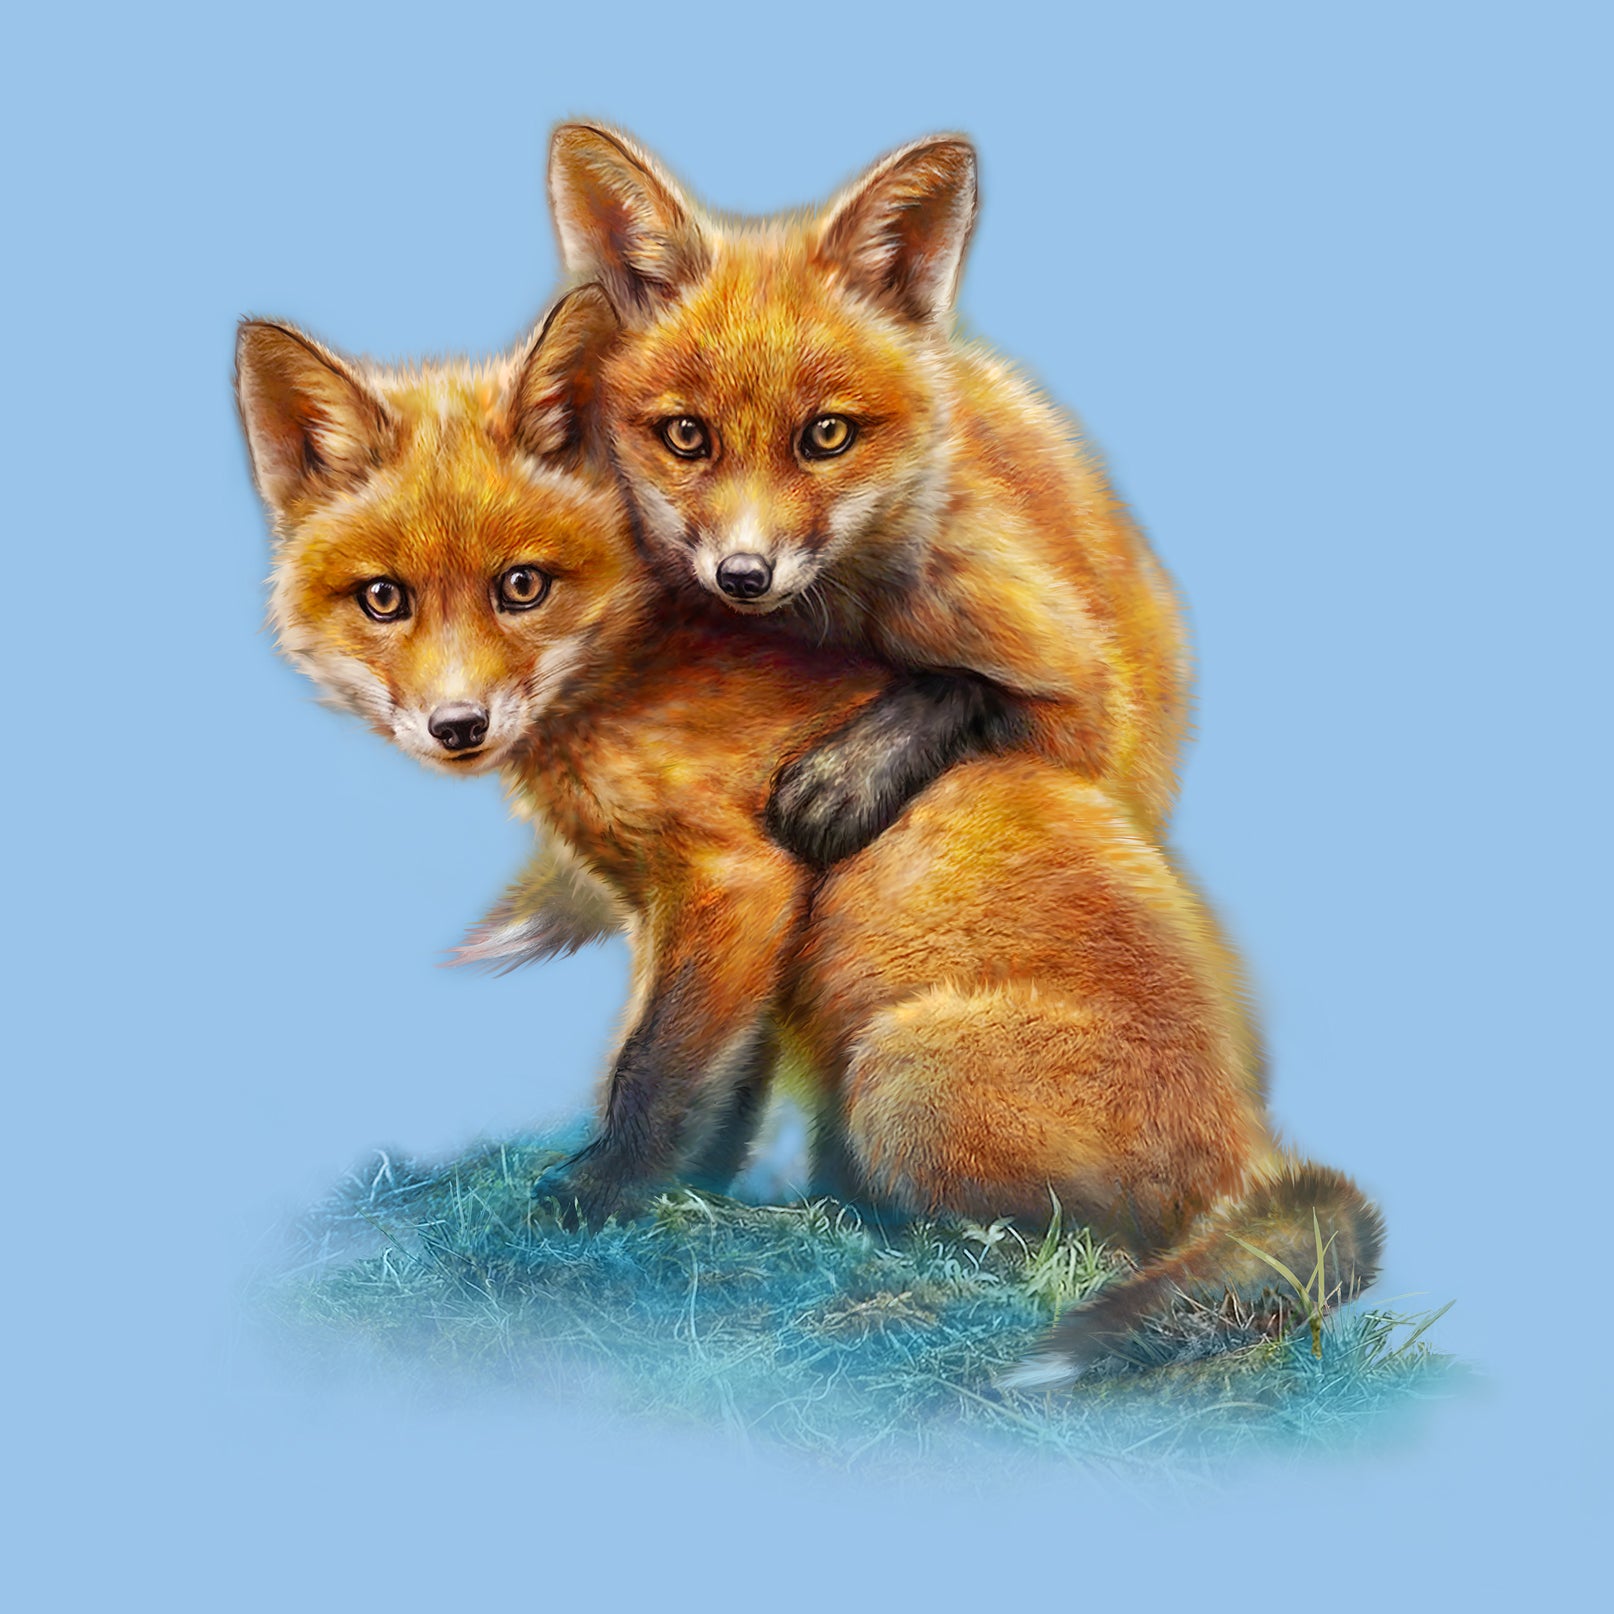 Fox Kits by Tami Alba- Artwork of two your foxes